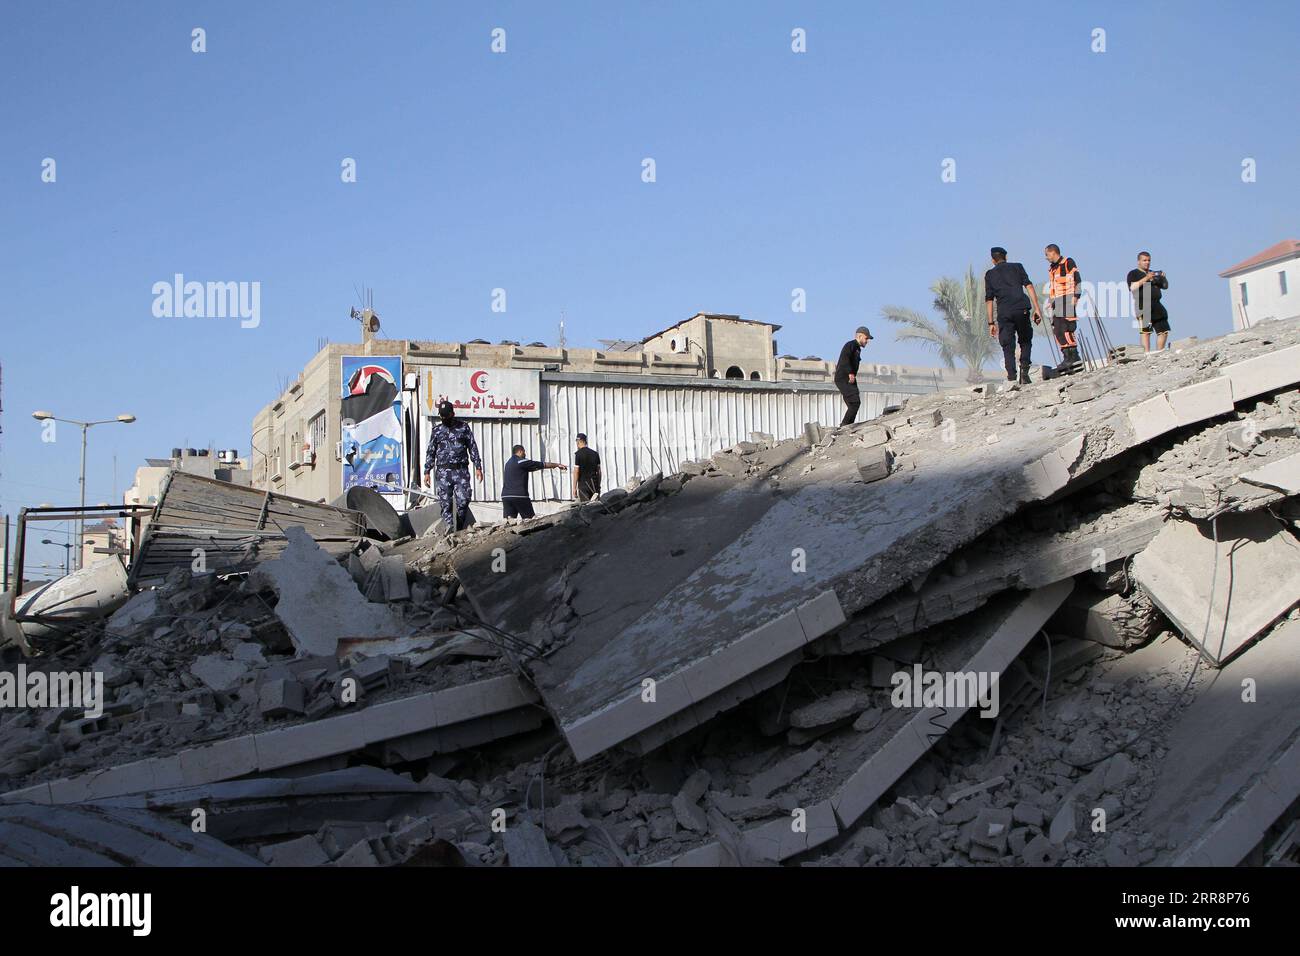 210514 -- GAZA, May 14, 2021 -- Palestinian people inspect the remains of a bank destroyed by an Israeli air strike in Gaza City, on May 14, 2021. Israel on Friday evening bombarded a bank that belongs to Hamas in Gaza city, the Israeli military and Hamas said. Photo by /Xinhua MIDEAST-GAZA CITY-HAMAS BANK-ISRAEL-AIR STRIKES RizekxAbdeljawad PUBLICATIONxNOTxINxCHN Stock Photo